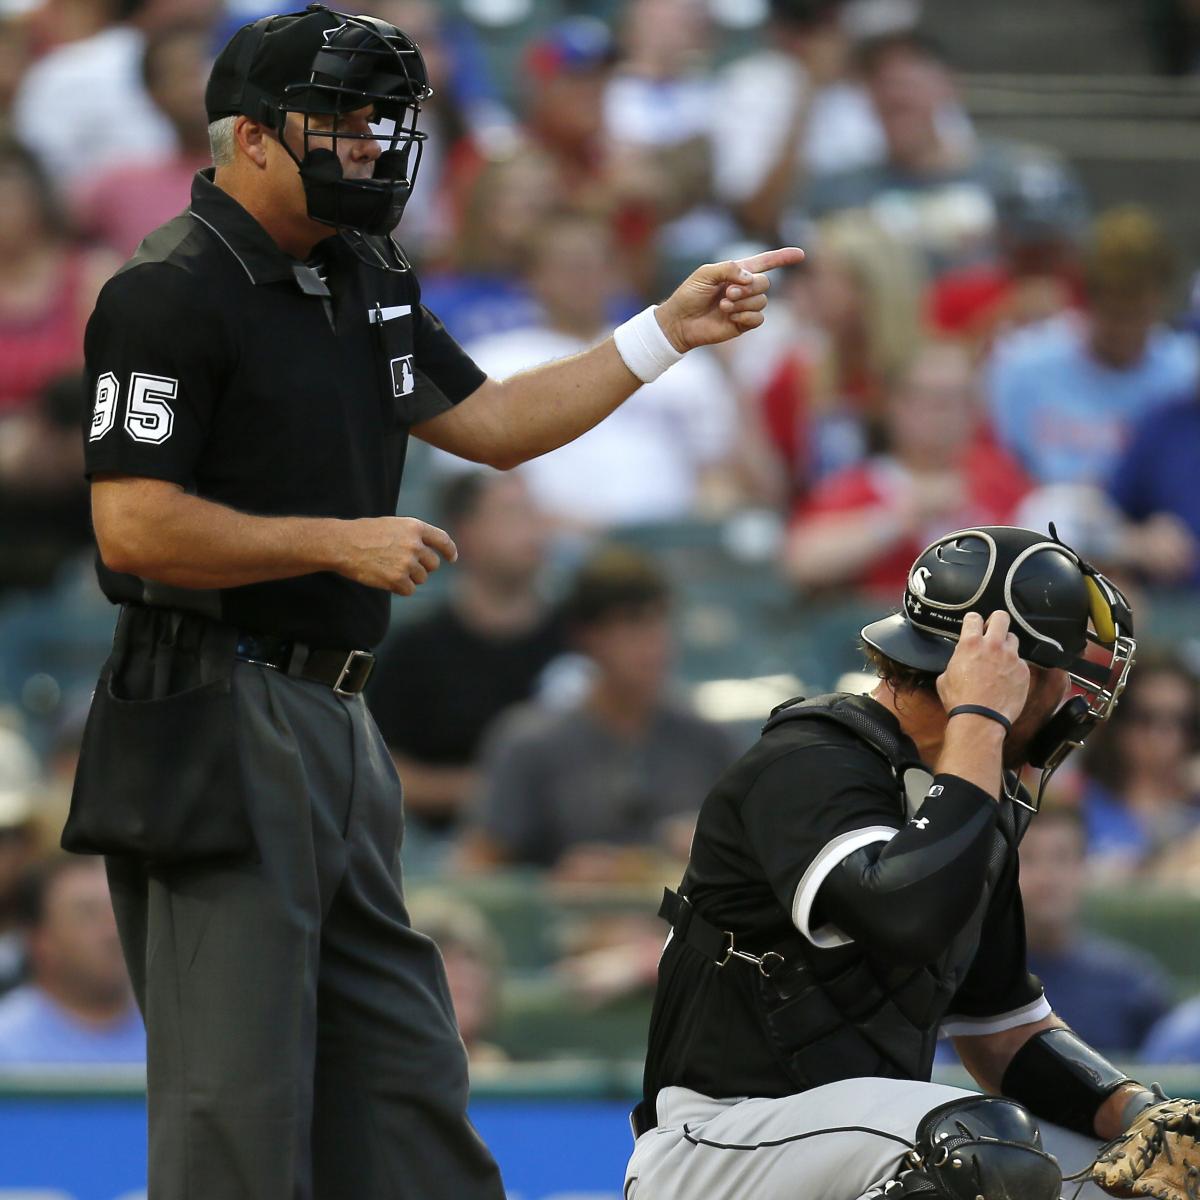 MLB umpires wear wristbands to protest 'abusive' treatment